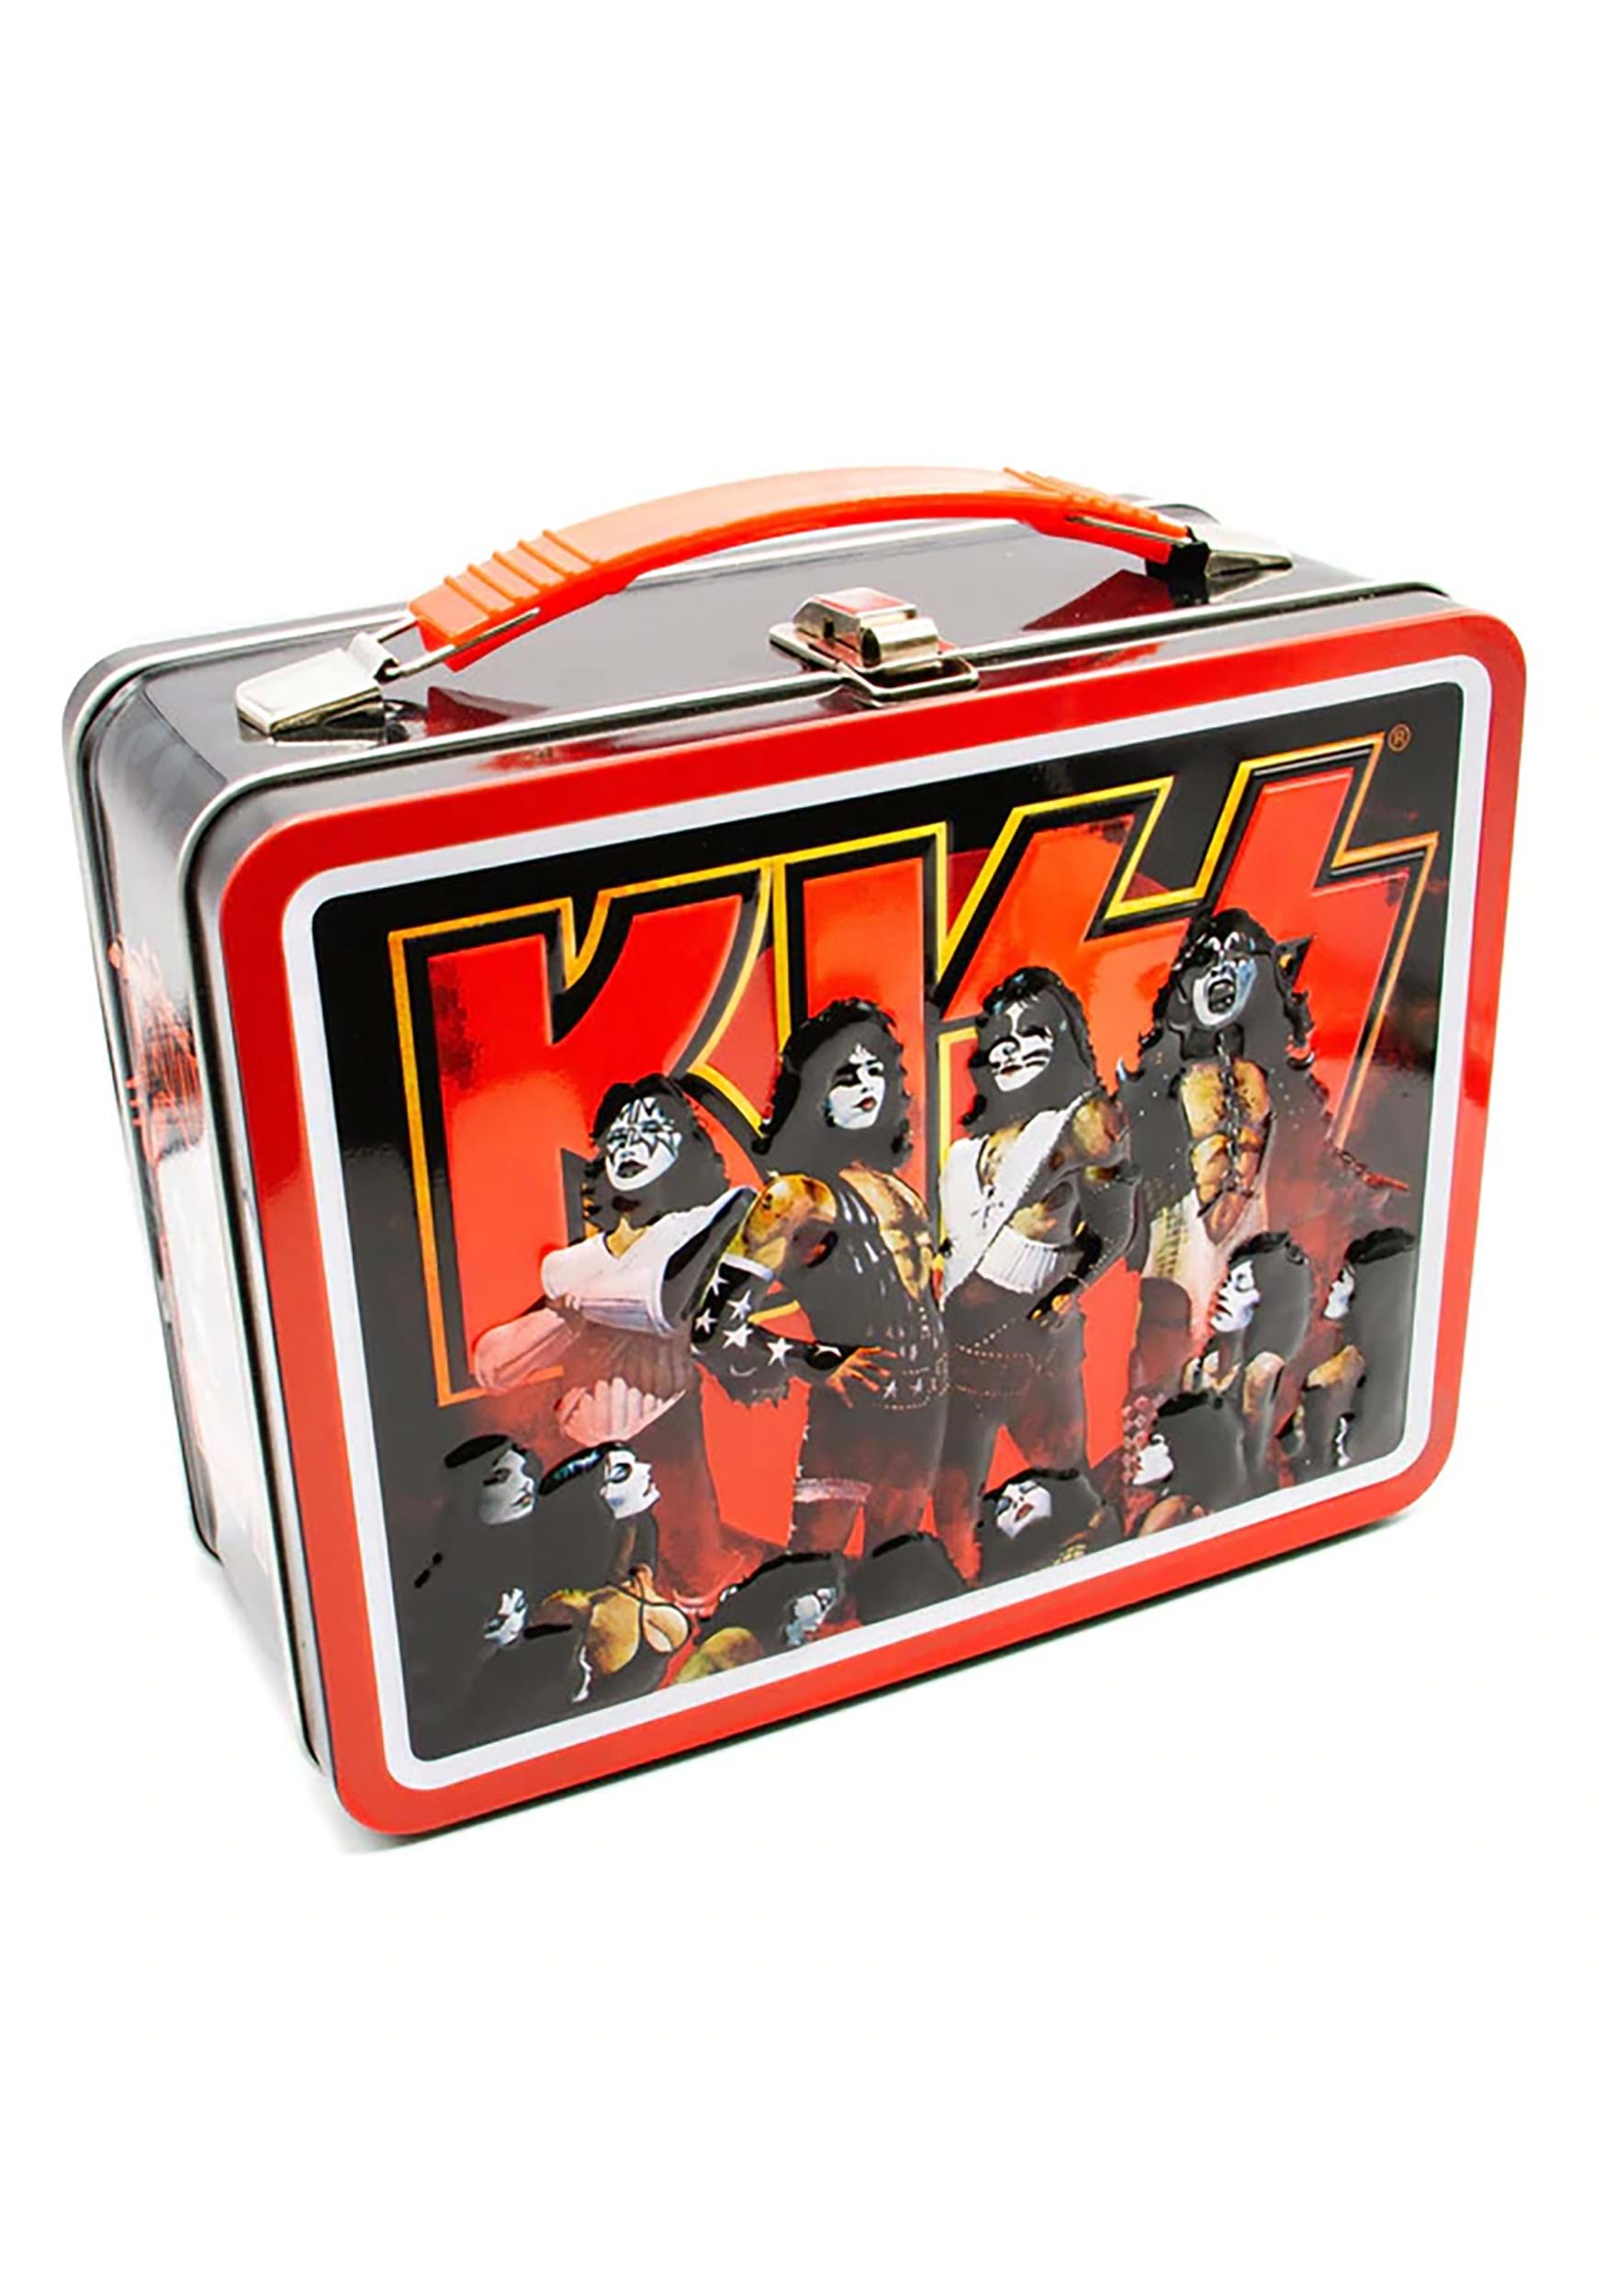 https://images.fun.com/products/83689/1-1/kiss-metal-lunch-box.jpg